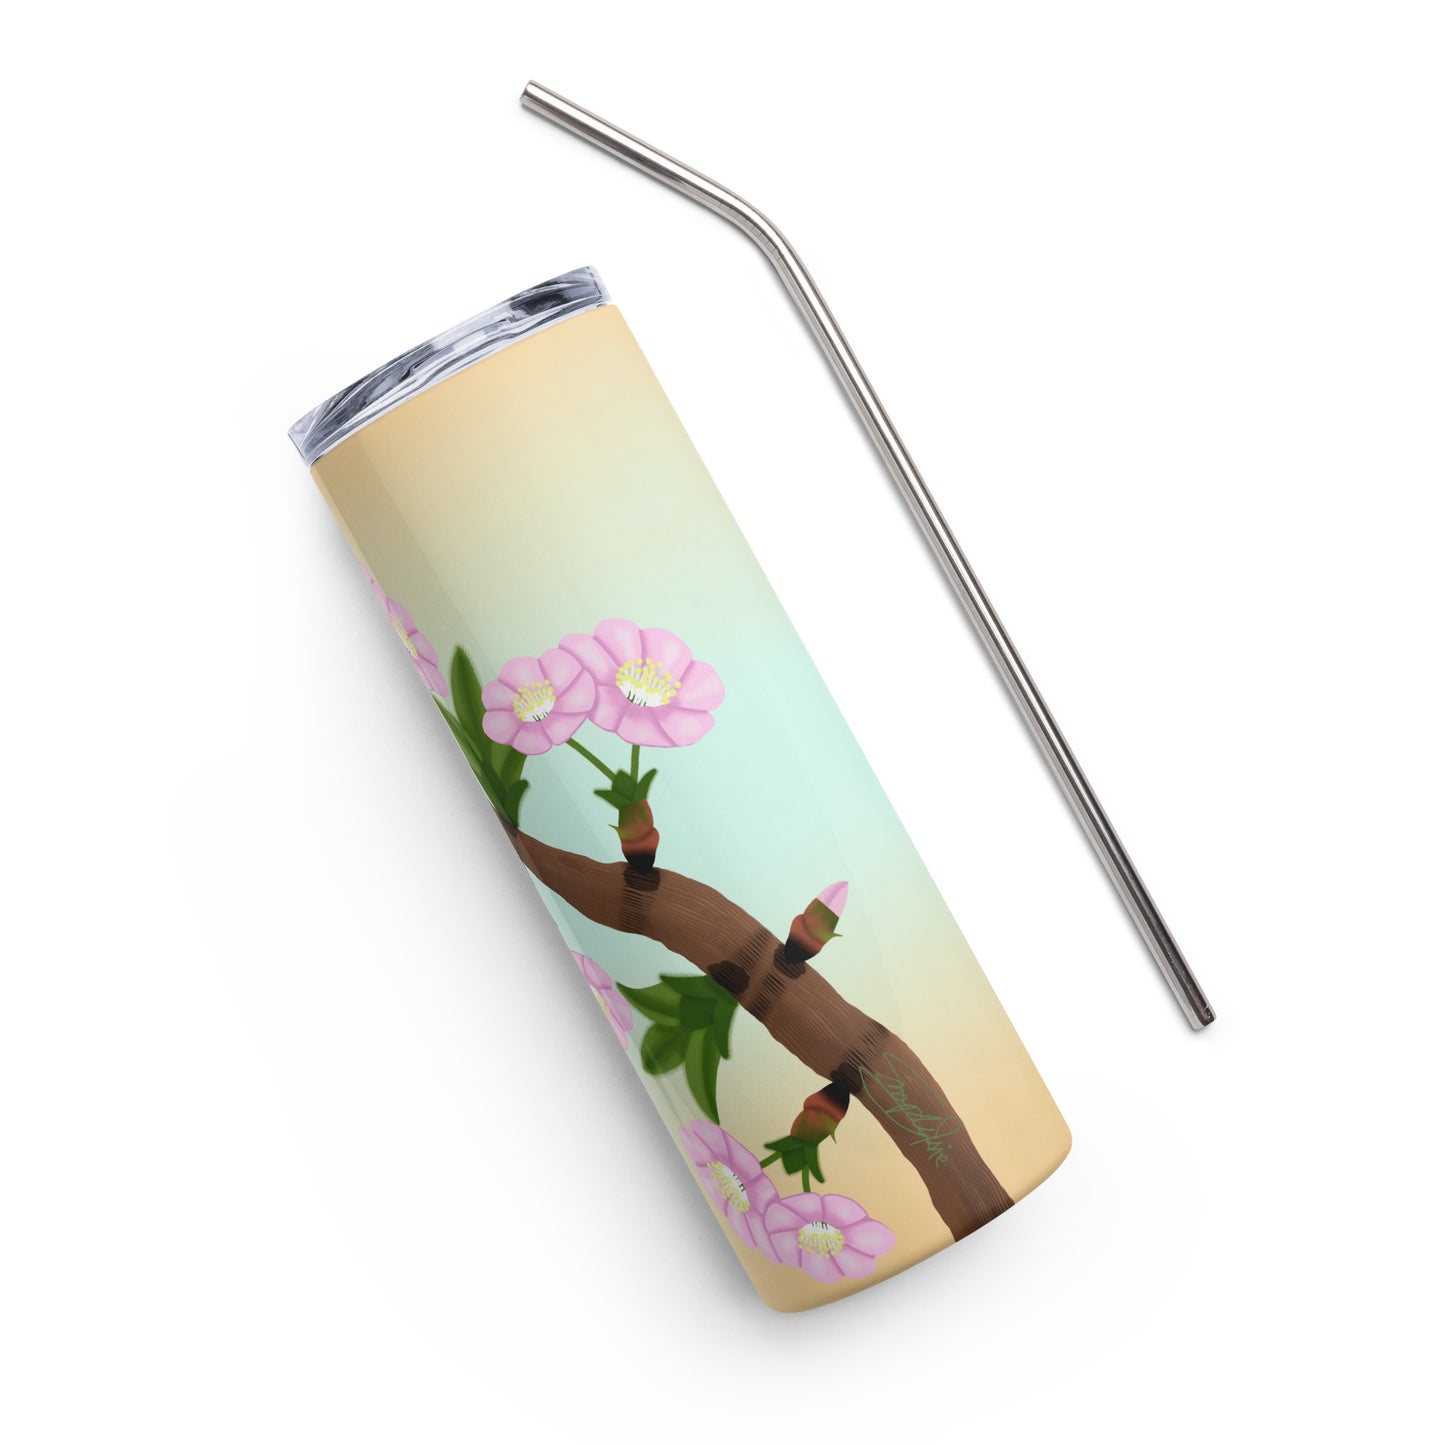 Looking on the blossom side - Stainless steel tumbler